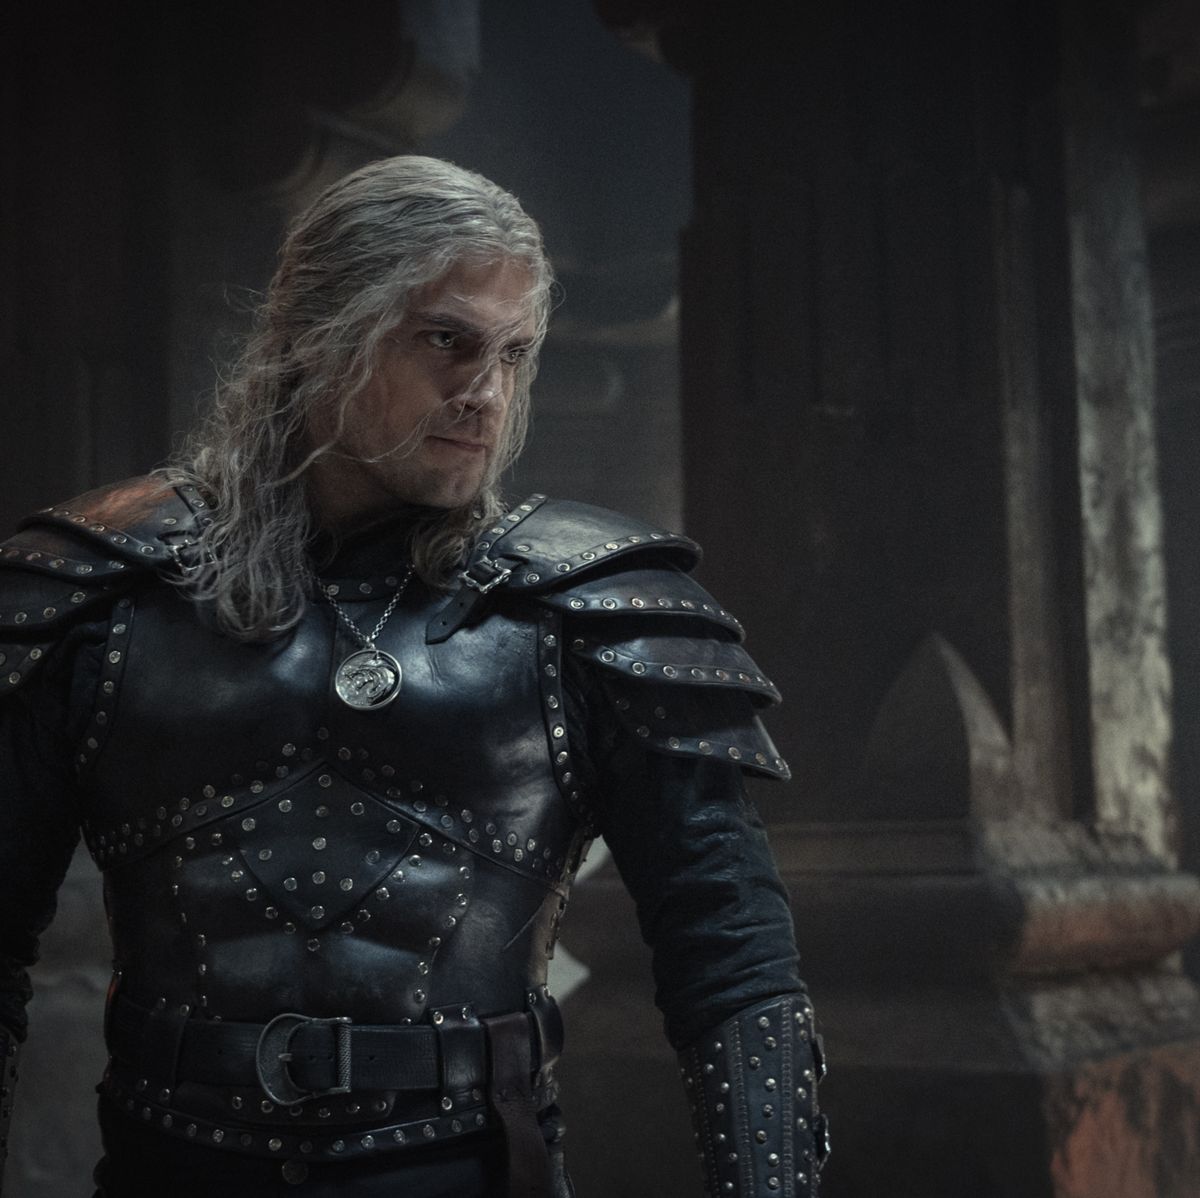 Netflix The Witcher: Season 3 and Spinoffs April 2022 News Roundup - What's  on Netflix